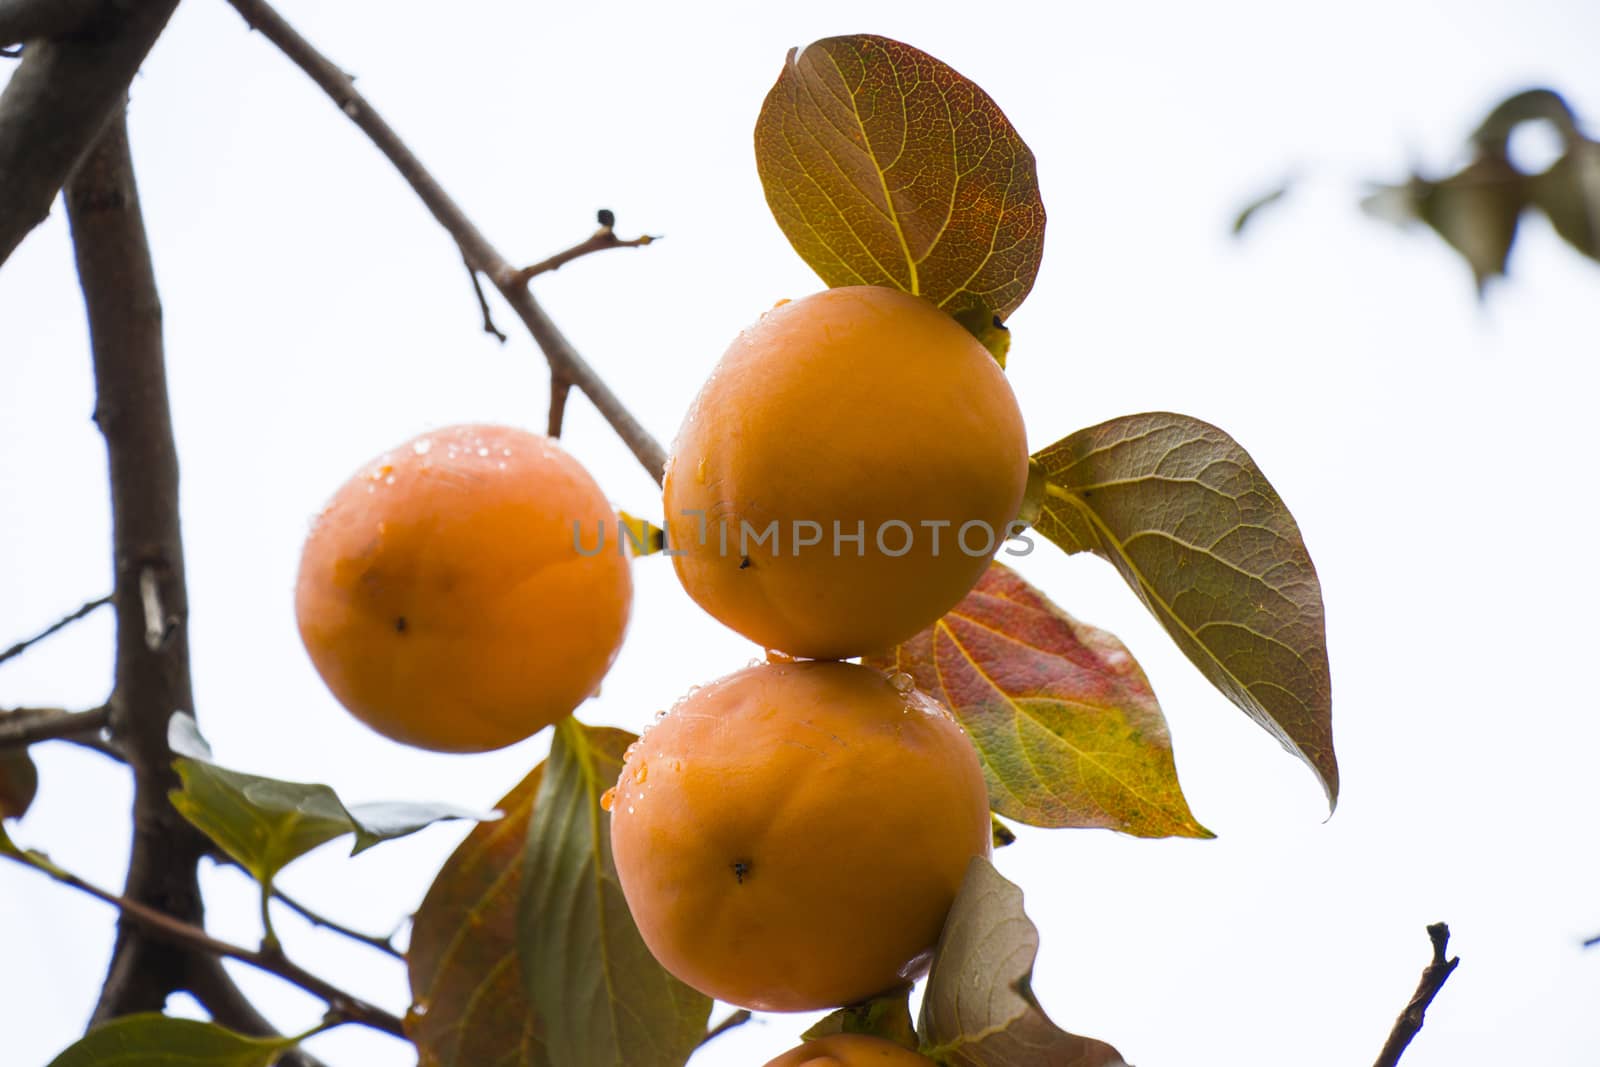 Persimmons on the tree, branch and leaves, autumn fruit close-up in Georgia